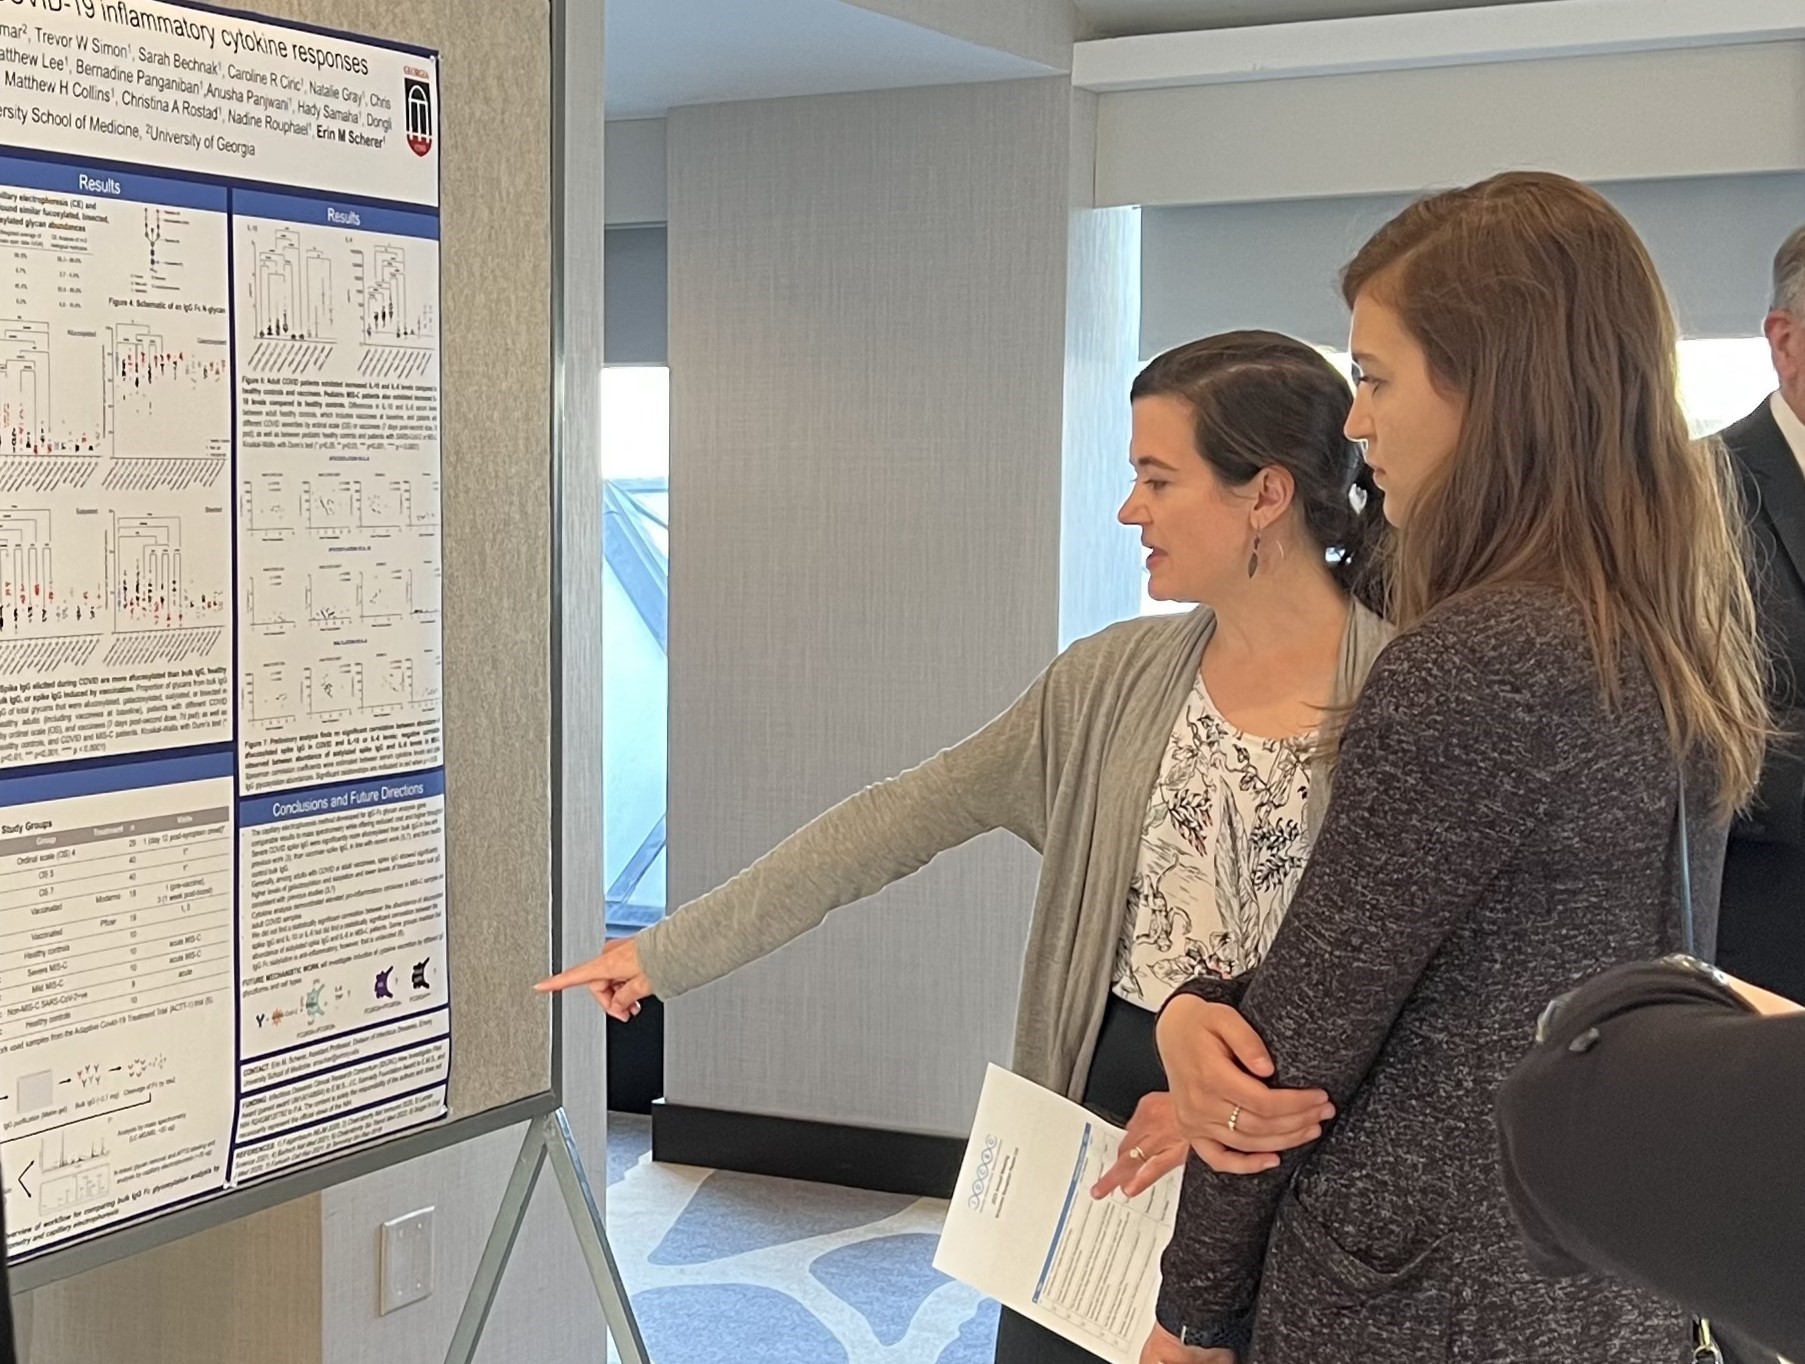 2023 IDCRC Annual Meeting poster session